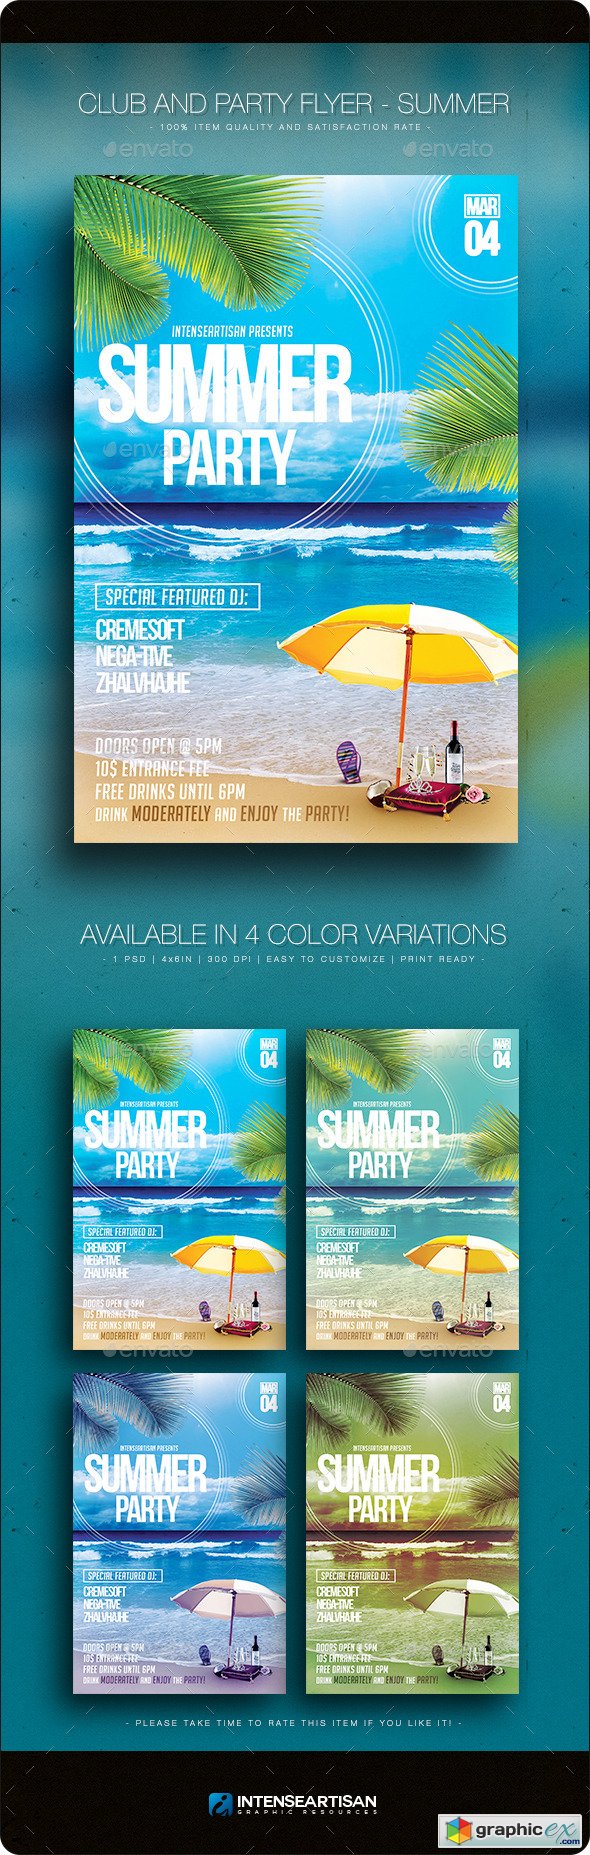  Summer V.1 - Club And Party Flyer